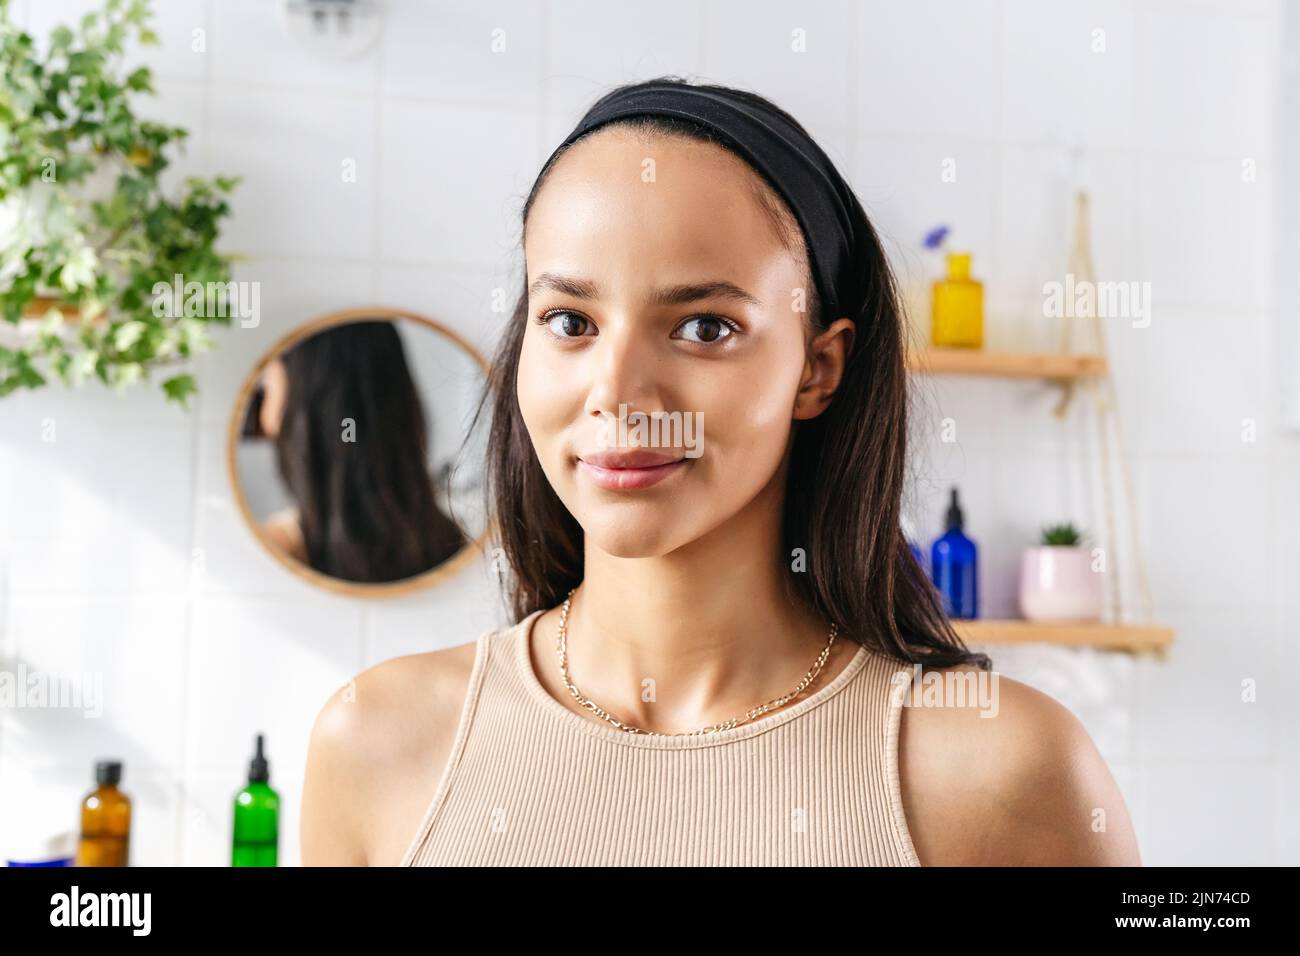 Close up beauty portrait of hispanic woman in bathroom. Confident young woman feeling positive and comfortable in her body. Woman's power. Wellness, skin care Stock Photo